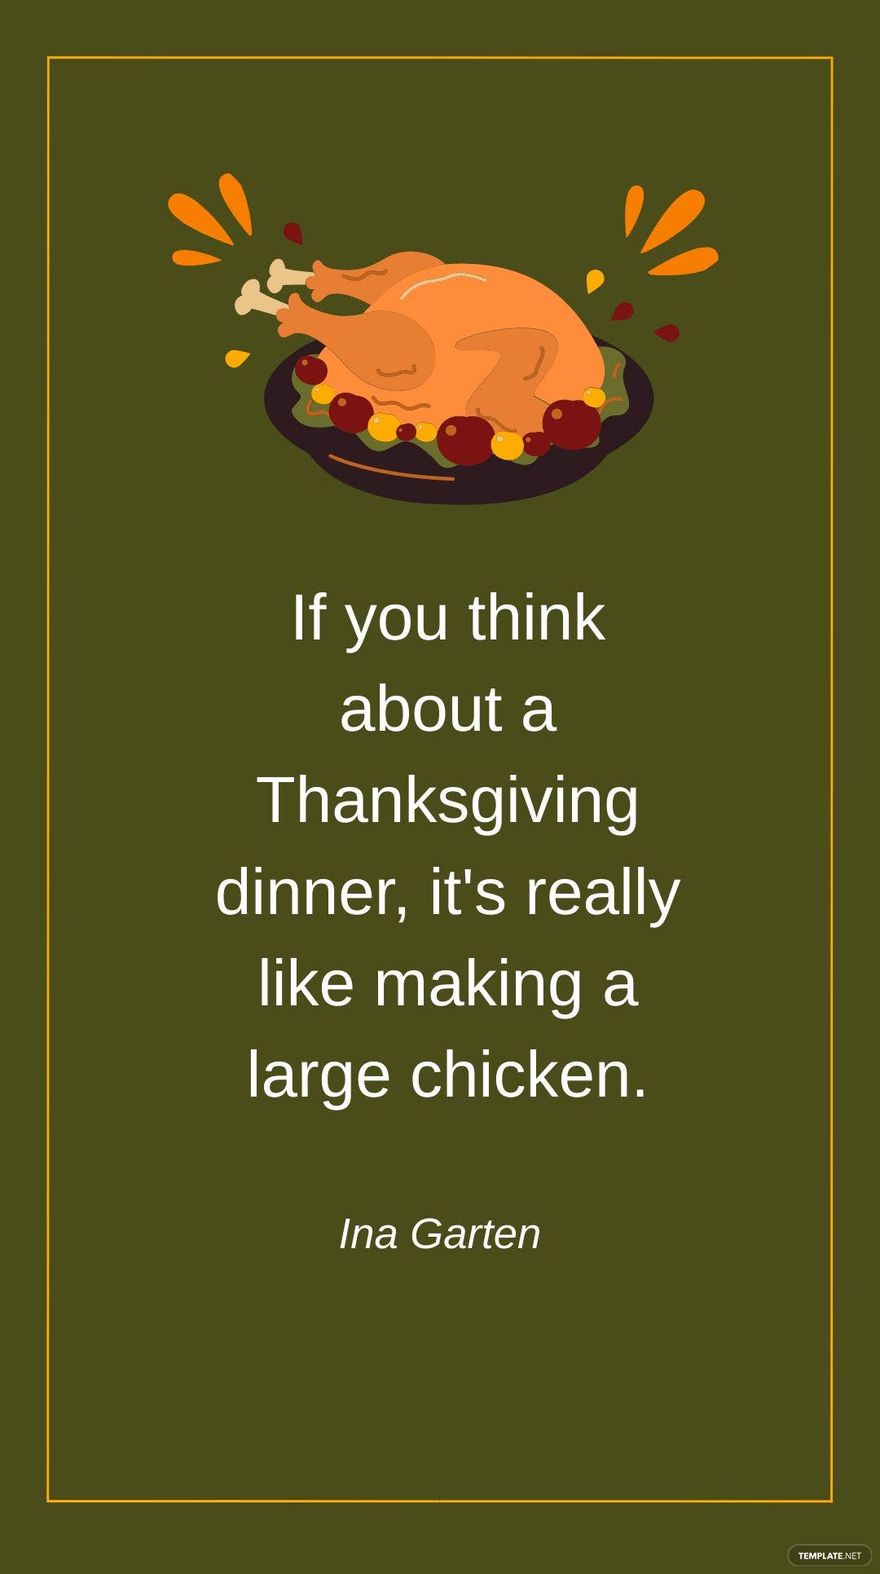 Ina Garten - If you think about a Thanksgiving dinner, it's really like making a large chicken.